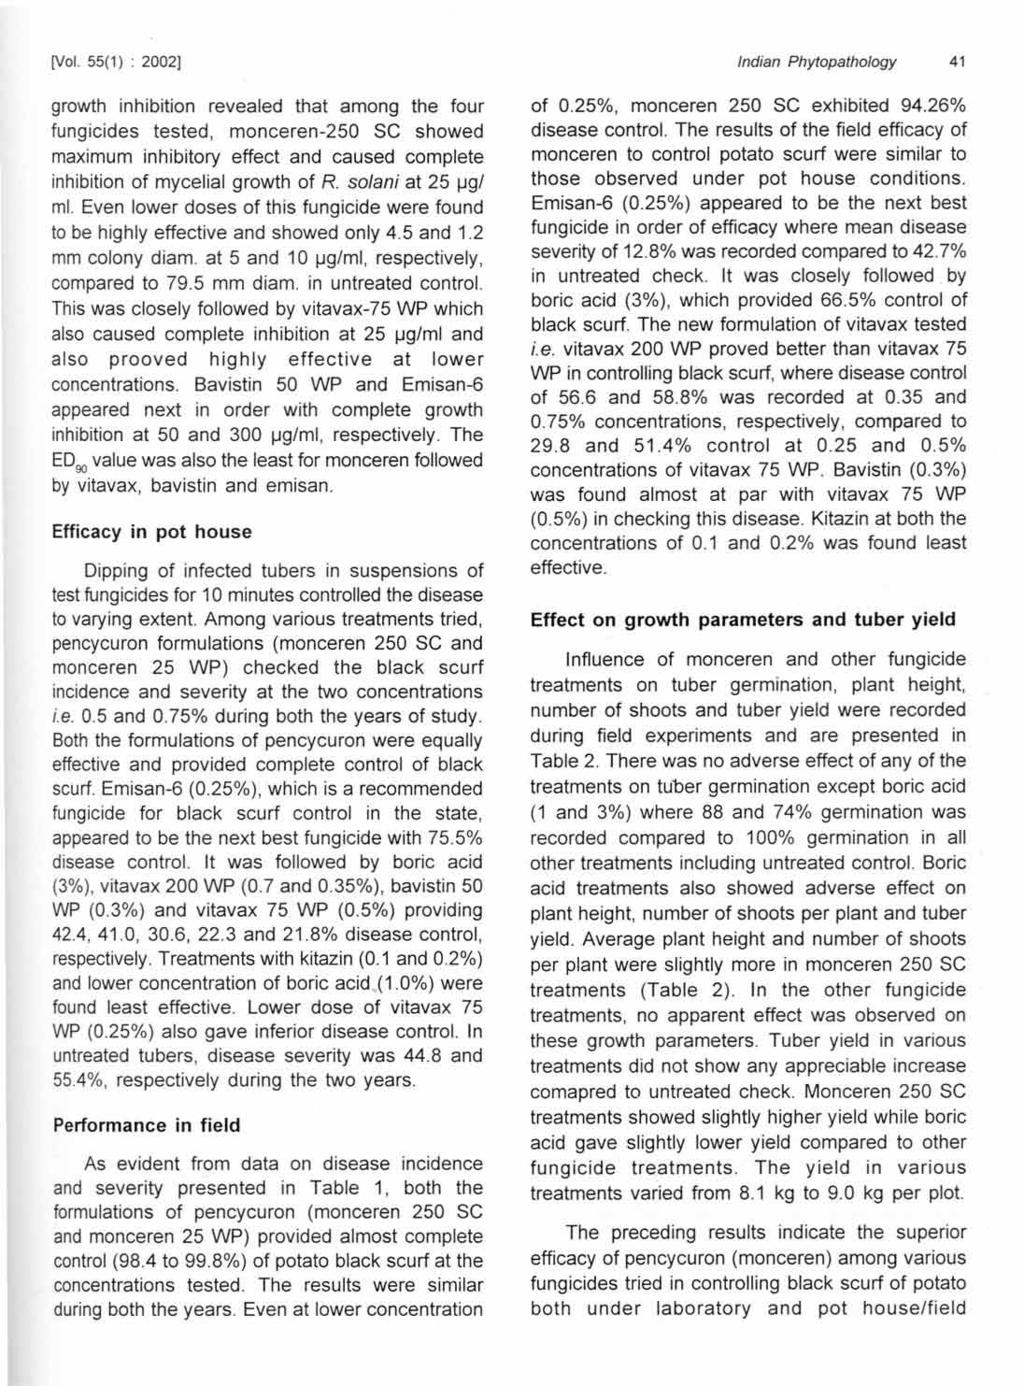 [Vol. 55(1) : 2002] growth inhibition revealed that among the four fungicides tested, monceren-250 SC showed maximum inhibitory effect and caused complete inhibition of mycelial growth of R.